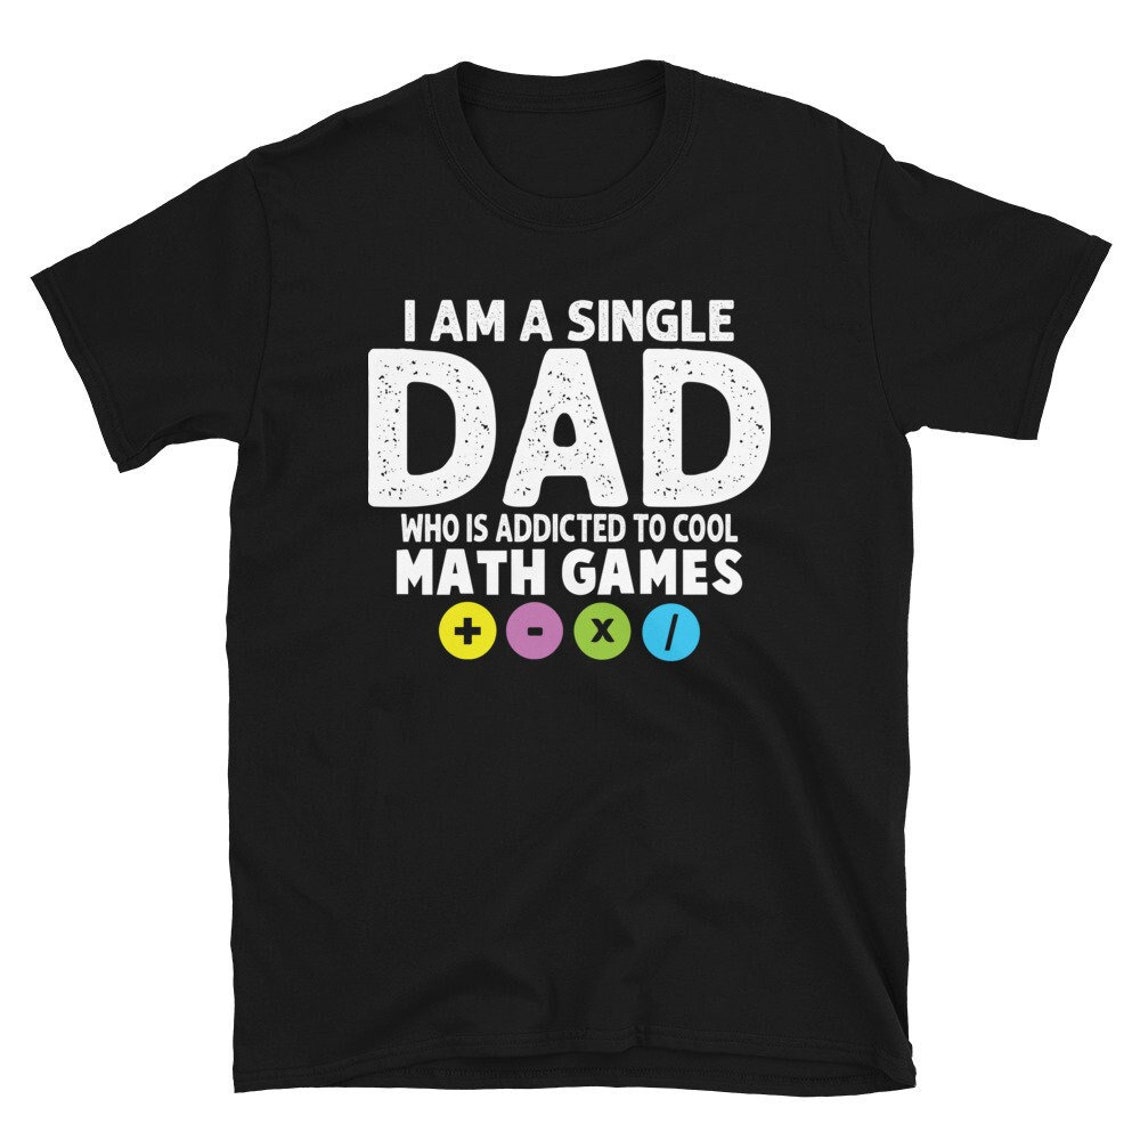 i am a single dad who is addicted to cool math